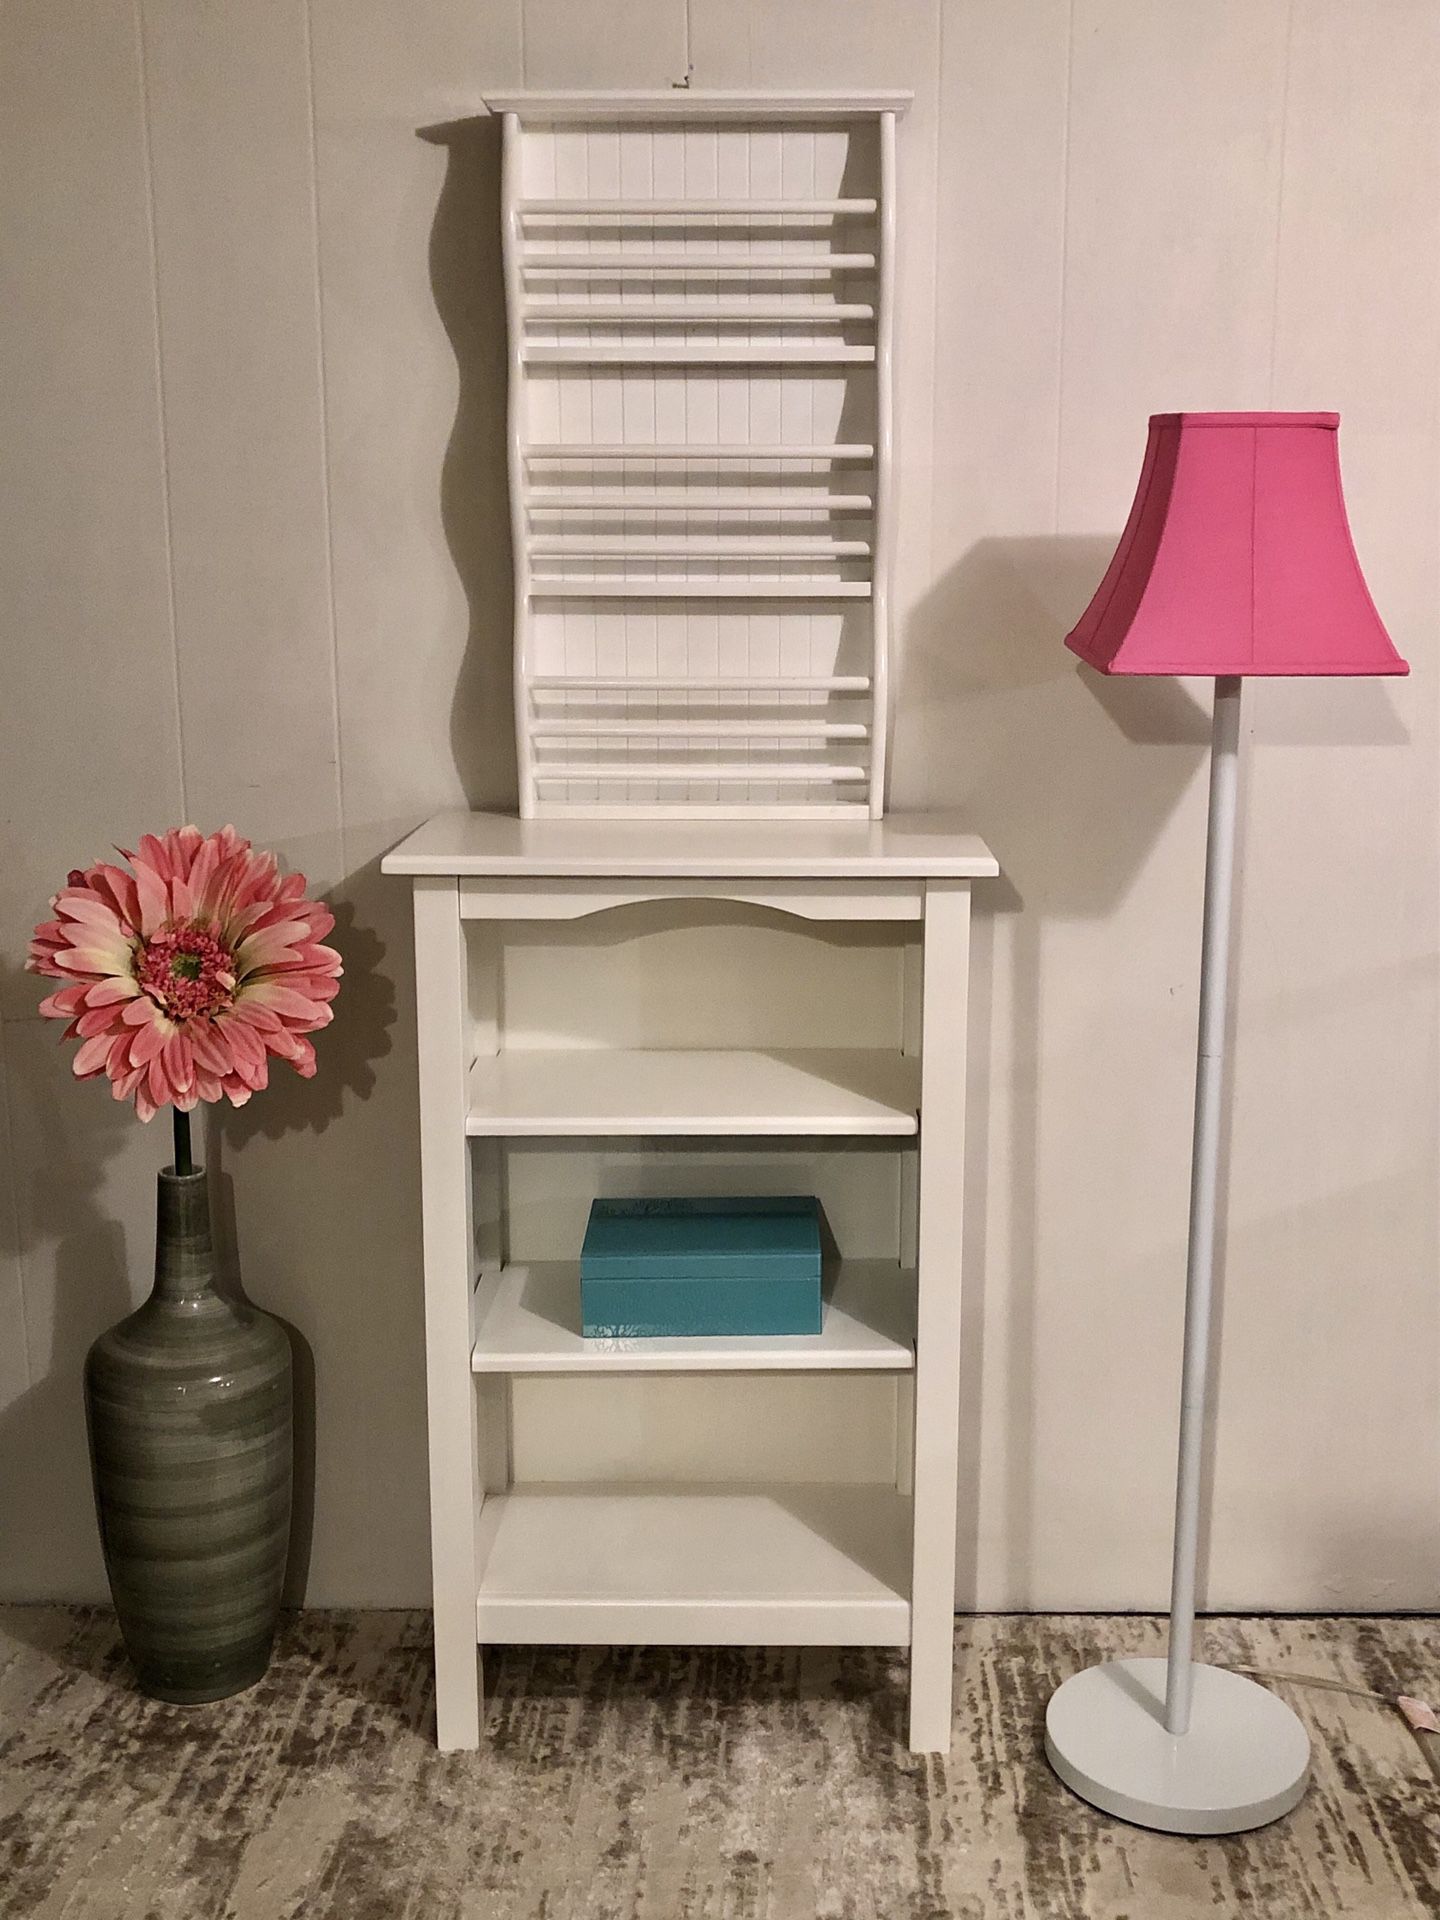 PENDING Storage shelves and lamp